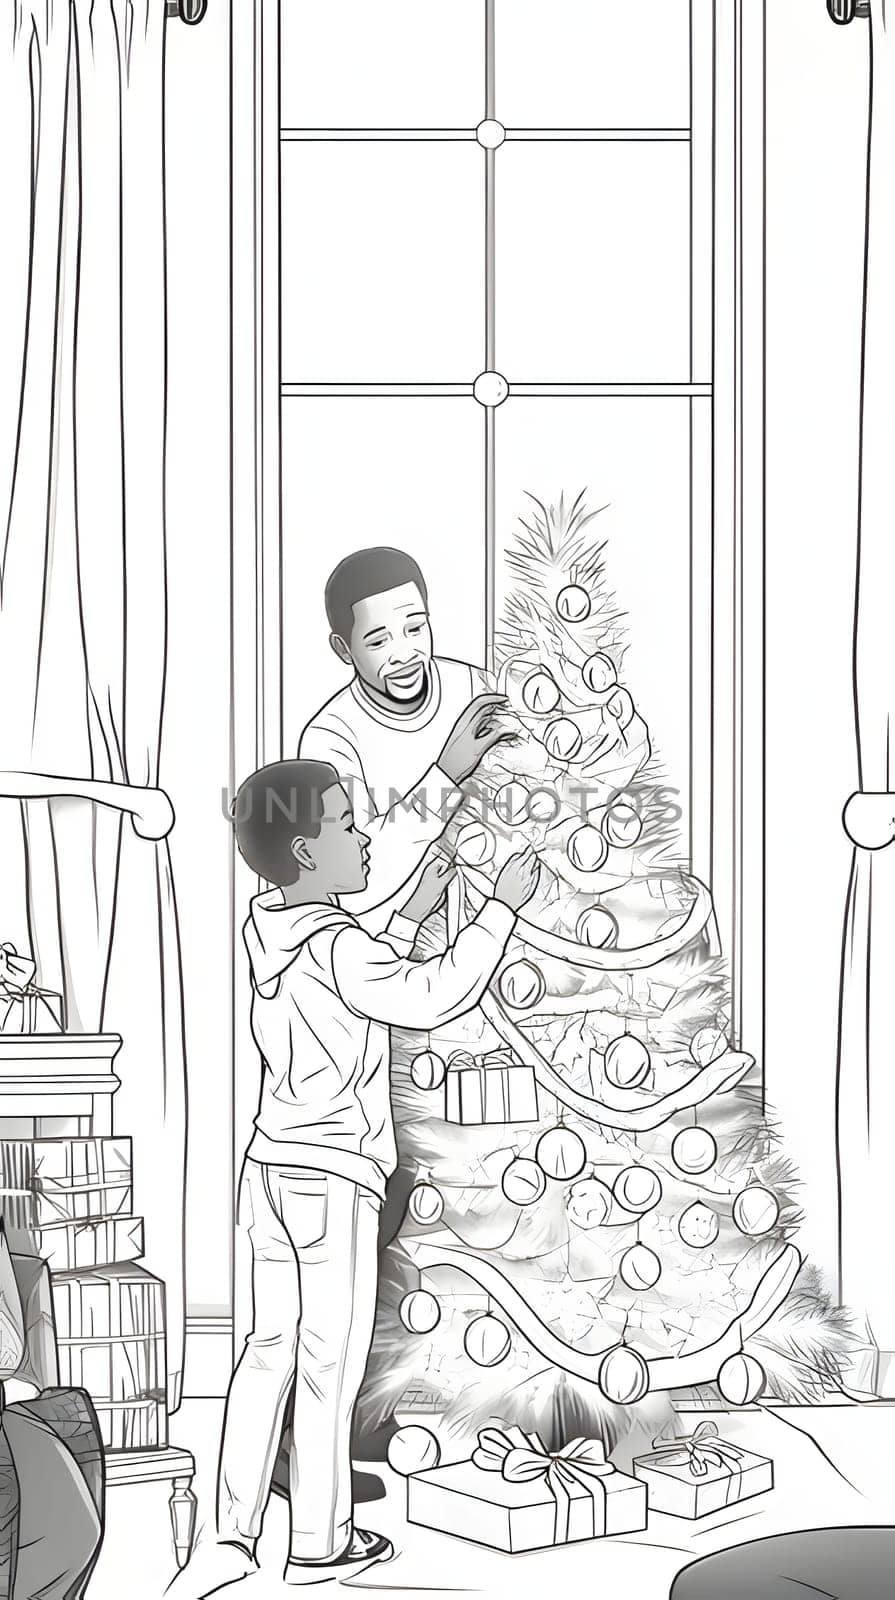 Father and son decorate Christmas tree, black and white coloring sheet. Xmas tree as a symbol of Christmas of the birth of the Savior. A time of joy and celebration.